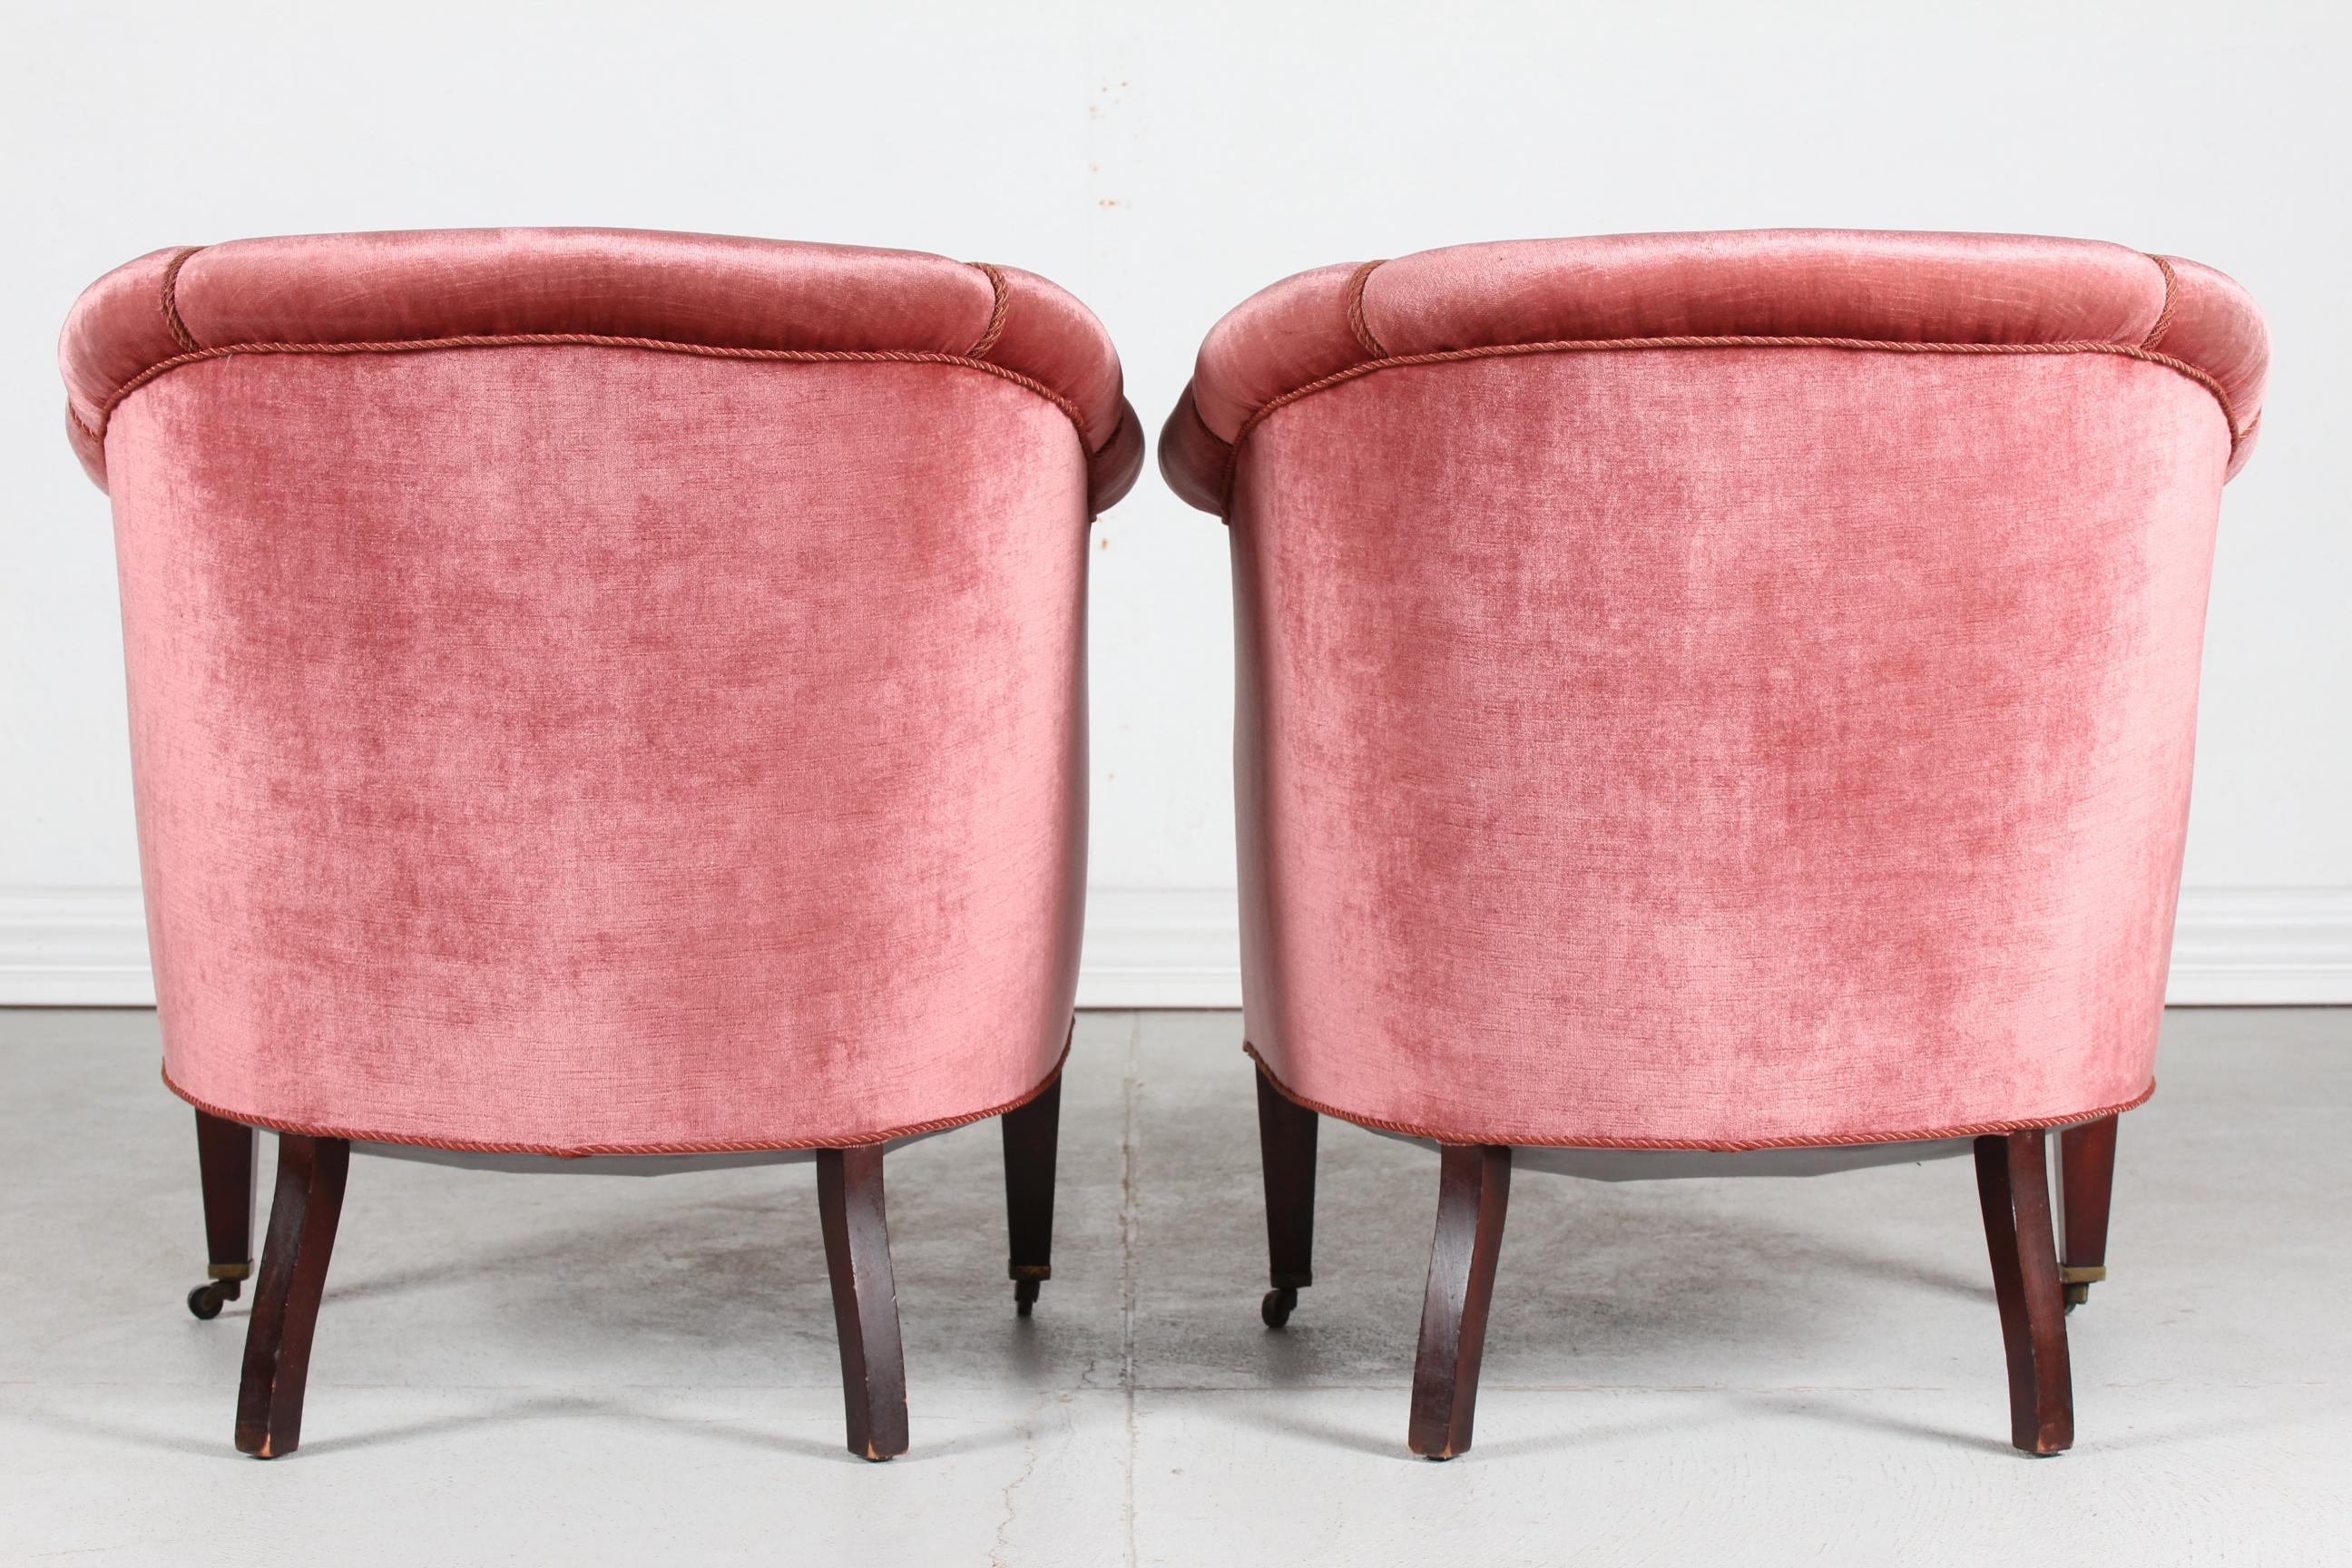 Pair of Old Danish Chesterfield Club Lounge Chairs Upholstered Pink Velvet 1920s 4